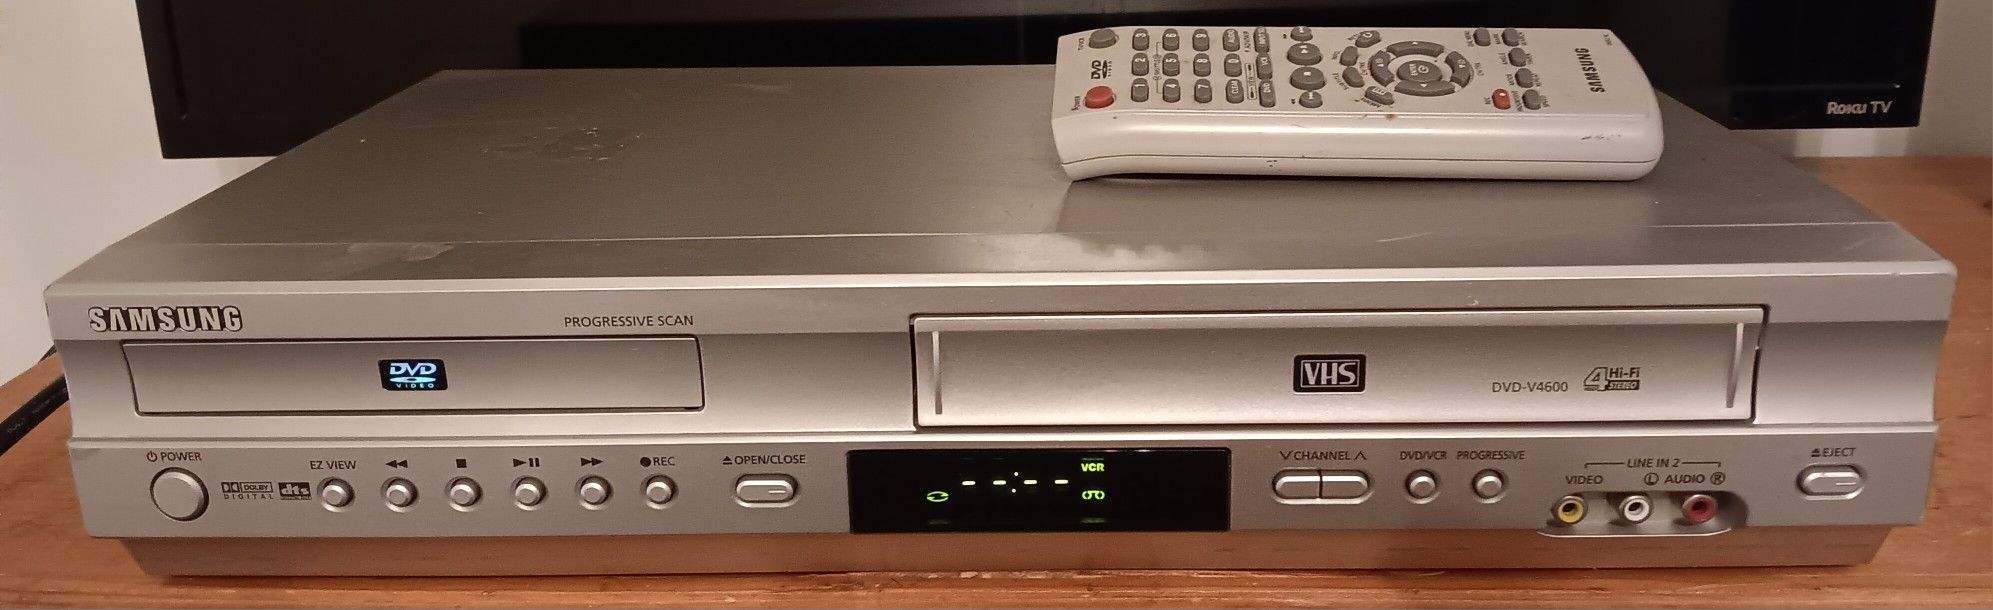 Samsung DVD VCR COMBO 4HEAD WITH REMOTE CONTROL 